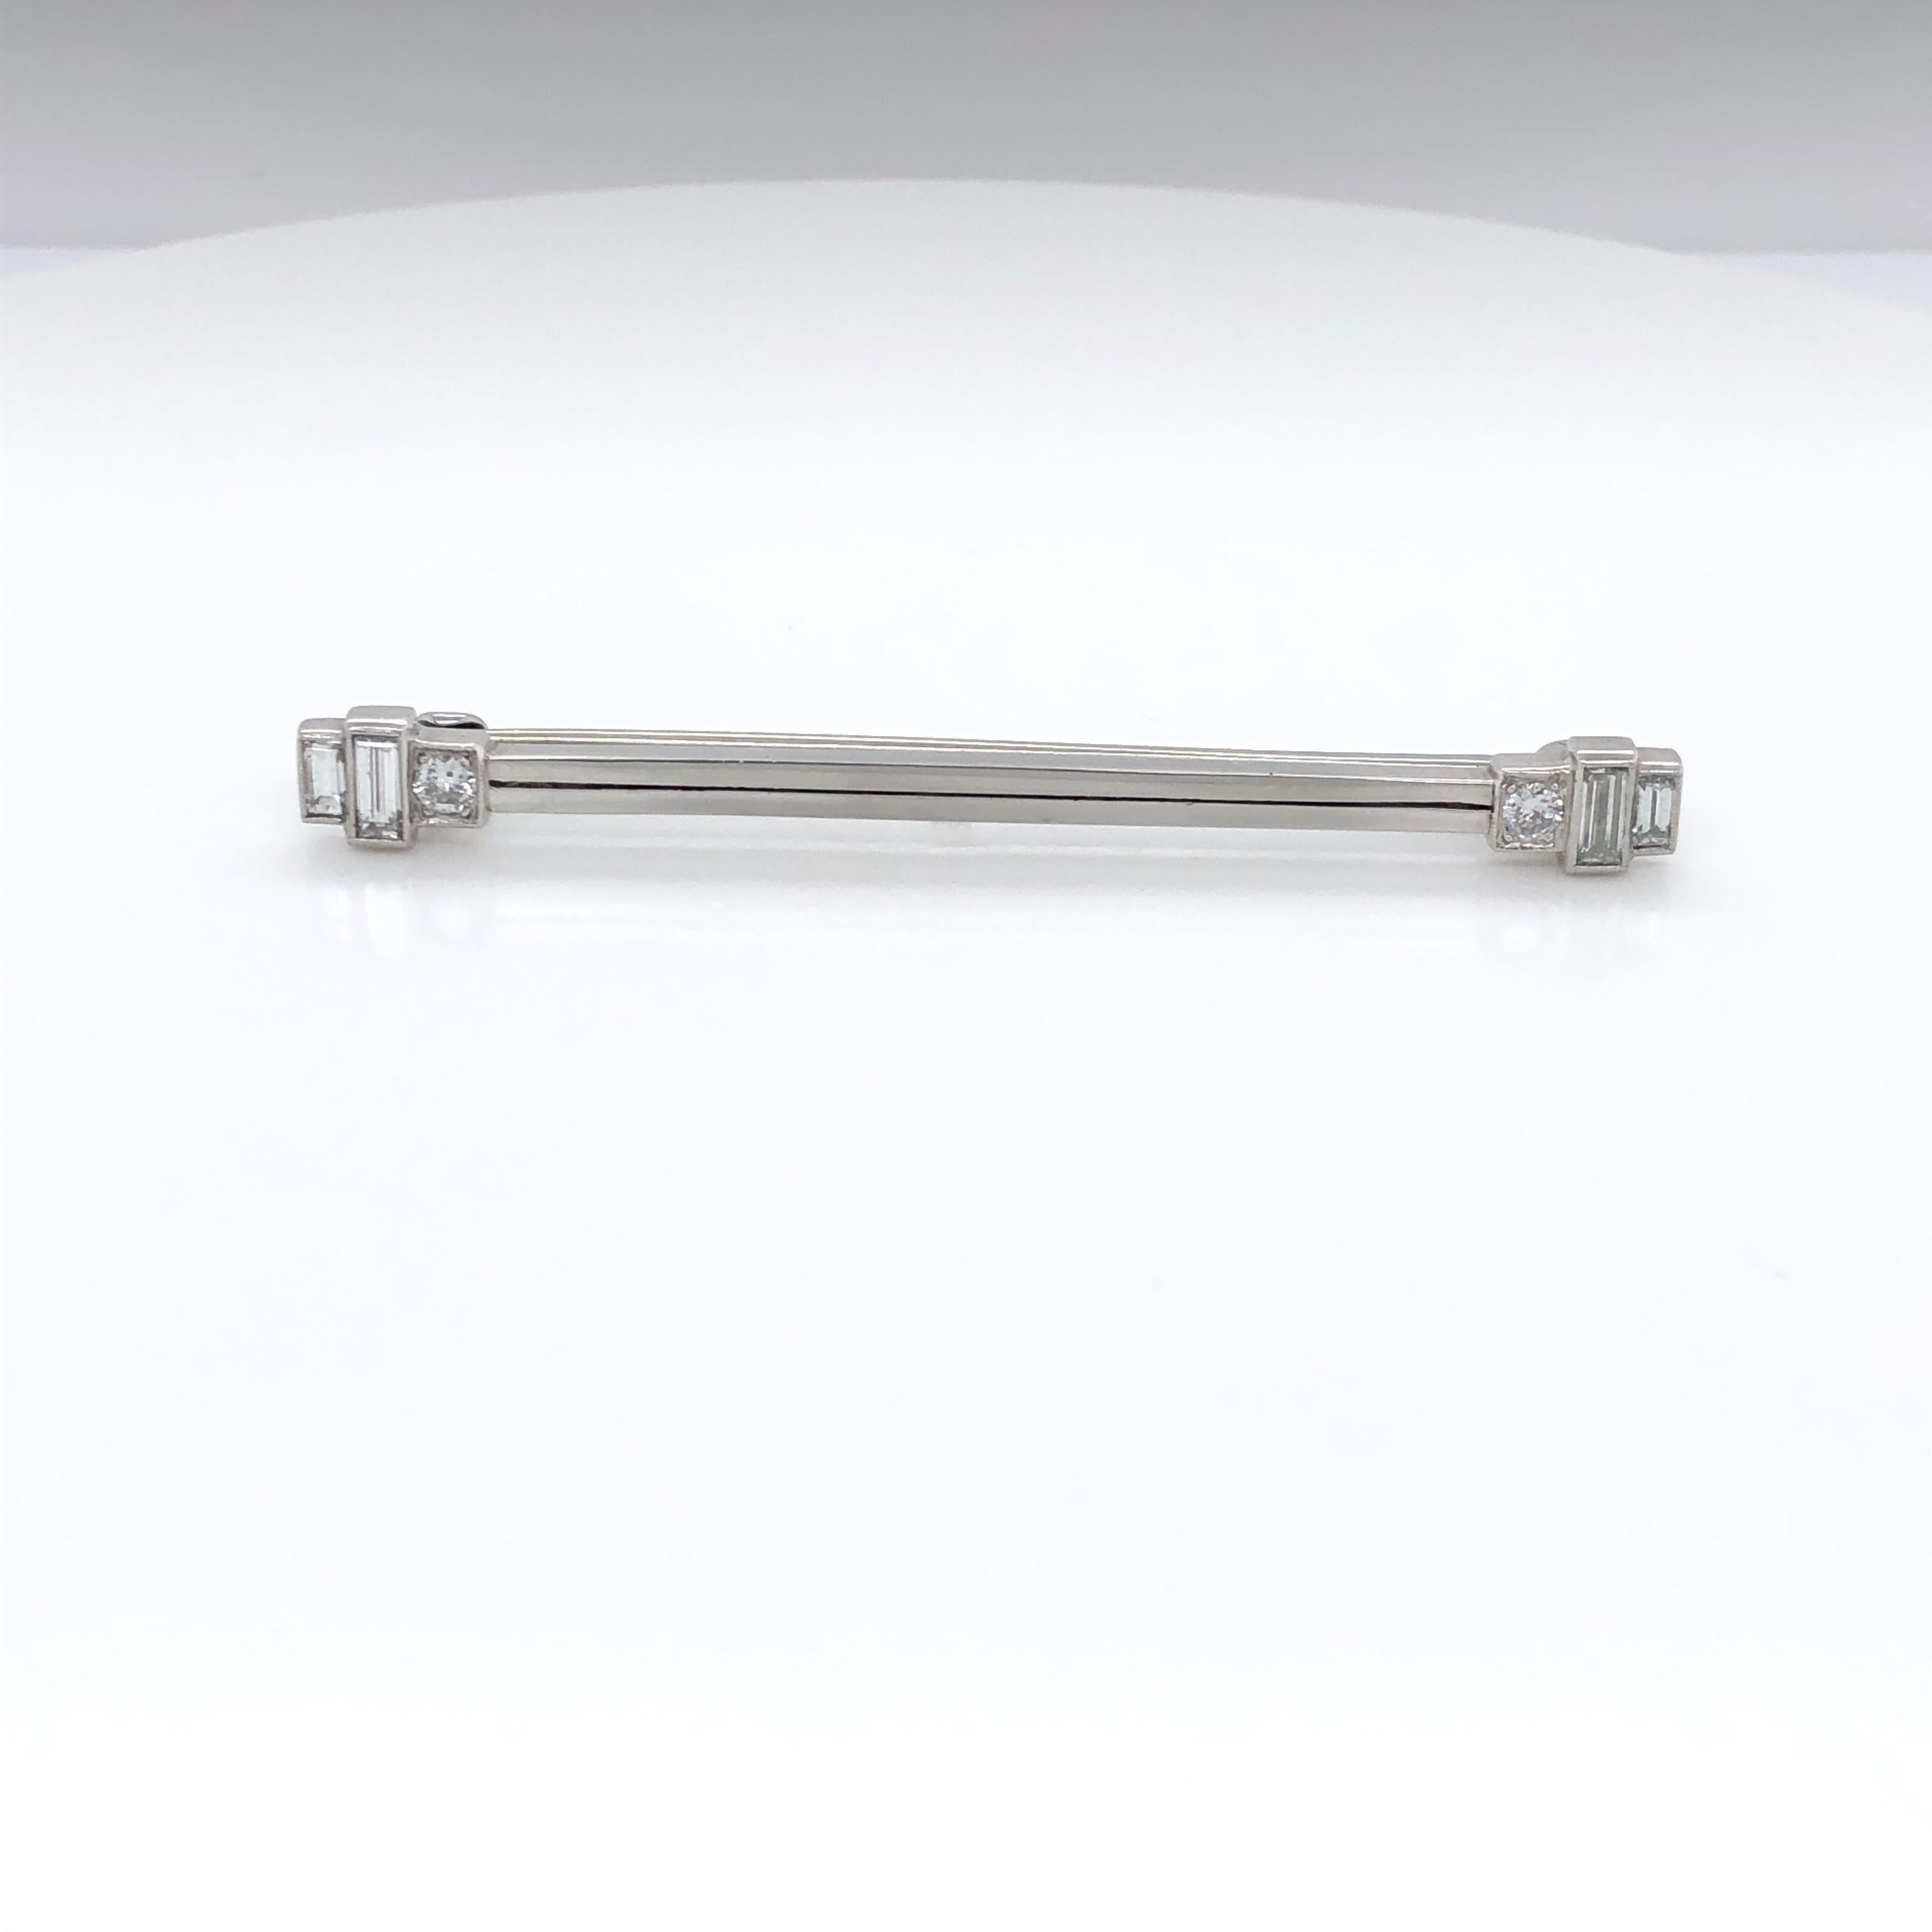 Perk up a breast pocket, scarf or tie with this beautiful art deco platinum and diamond bar pin.  At two inches in length this classic bar pin fits anywhere in your wardrobe. Geometric in shape, each end of the pin is adorned with three diamonds